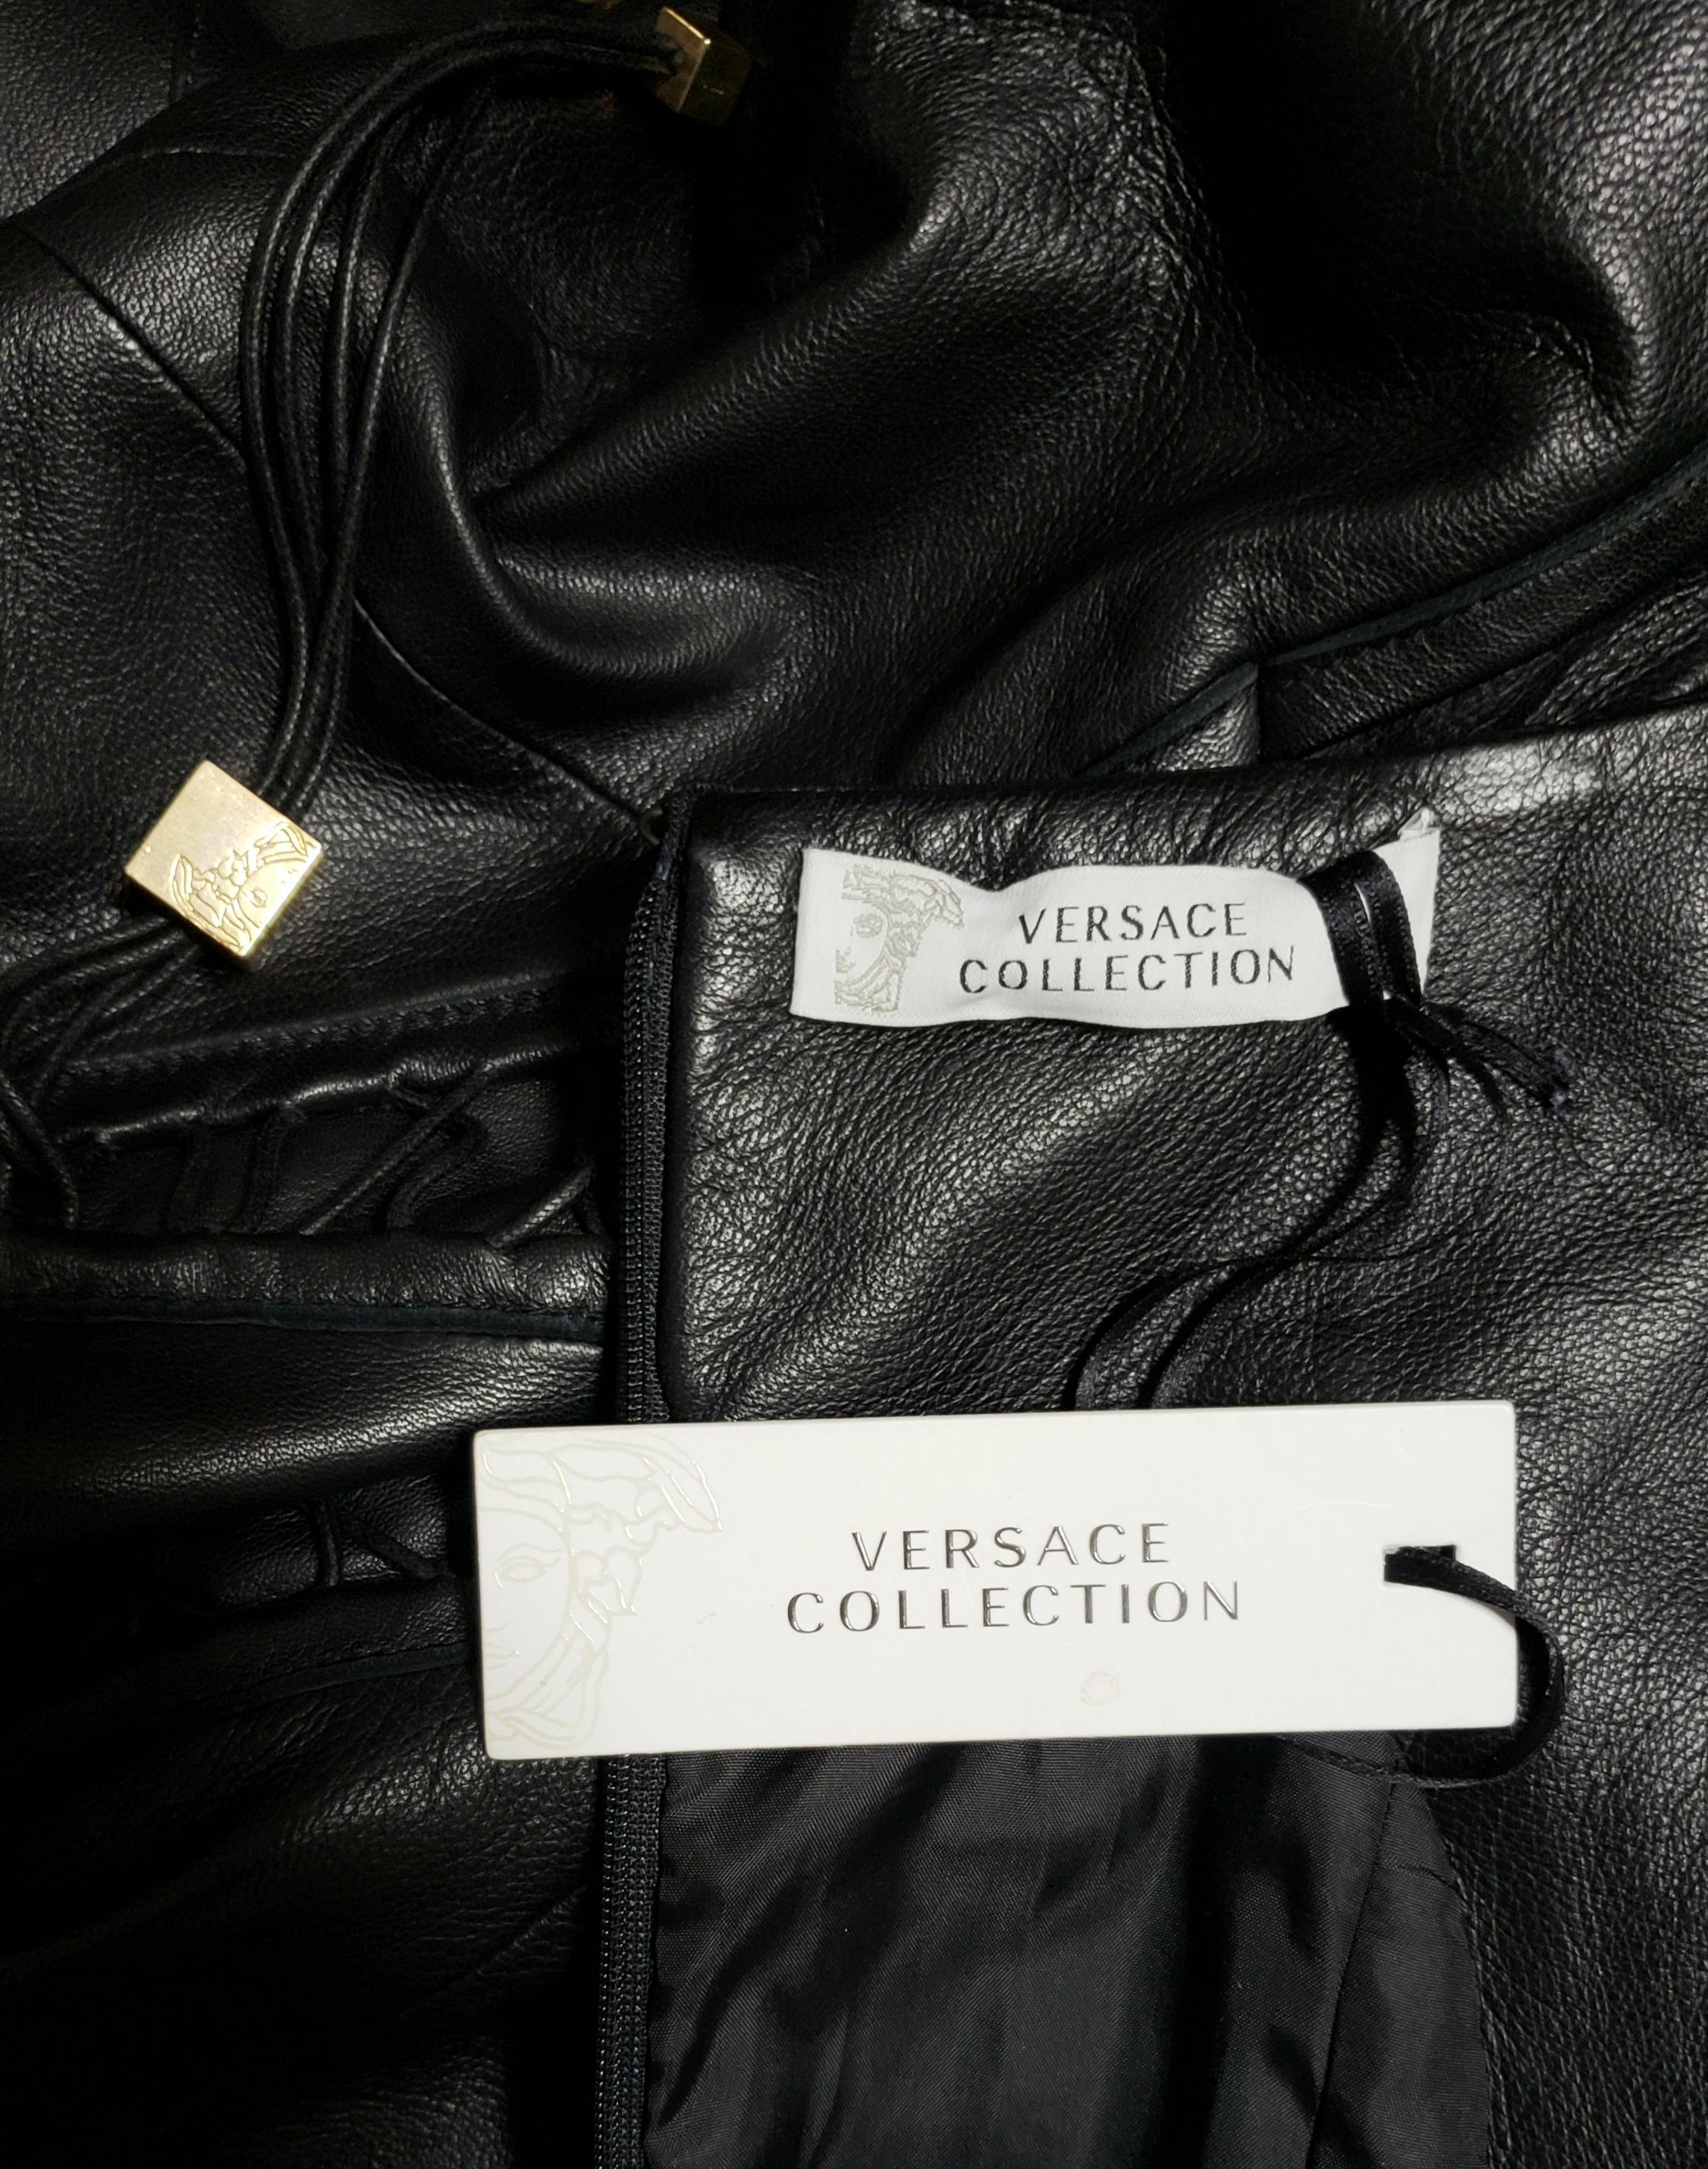 VERSACE BLACK LEATHER DRESS with TASSELS 38 - 4 For Sale 7